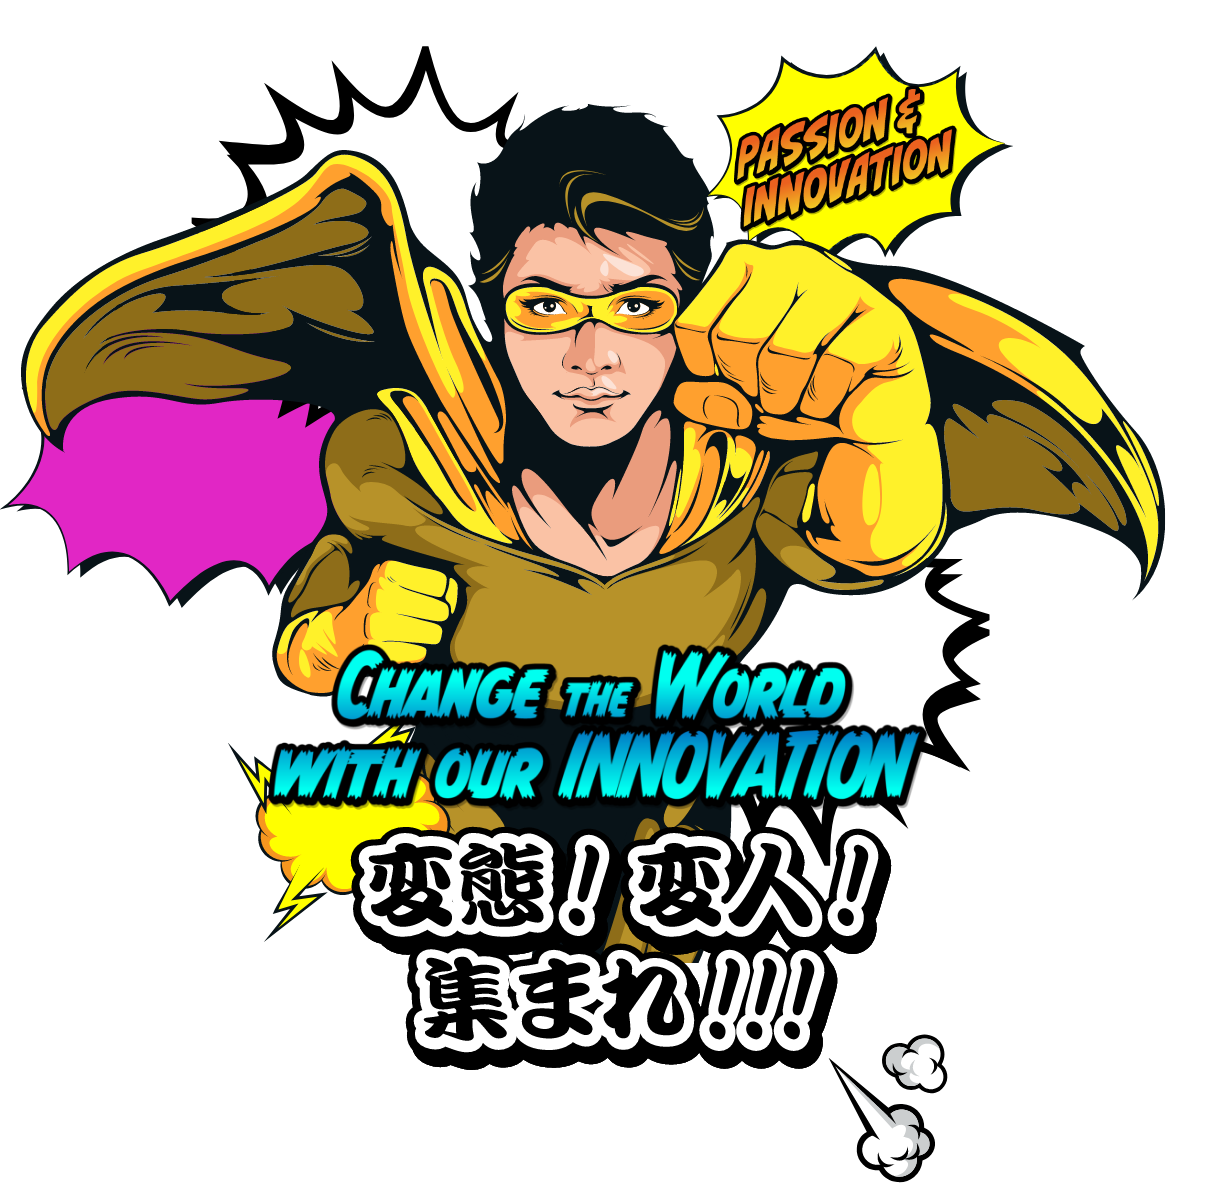 CHANGE THE WORLD WITH OUR INNOVATION 変態！変人！集まれ！！！